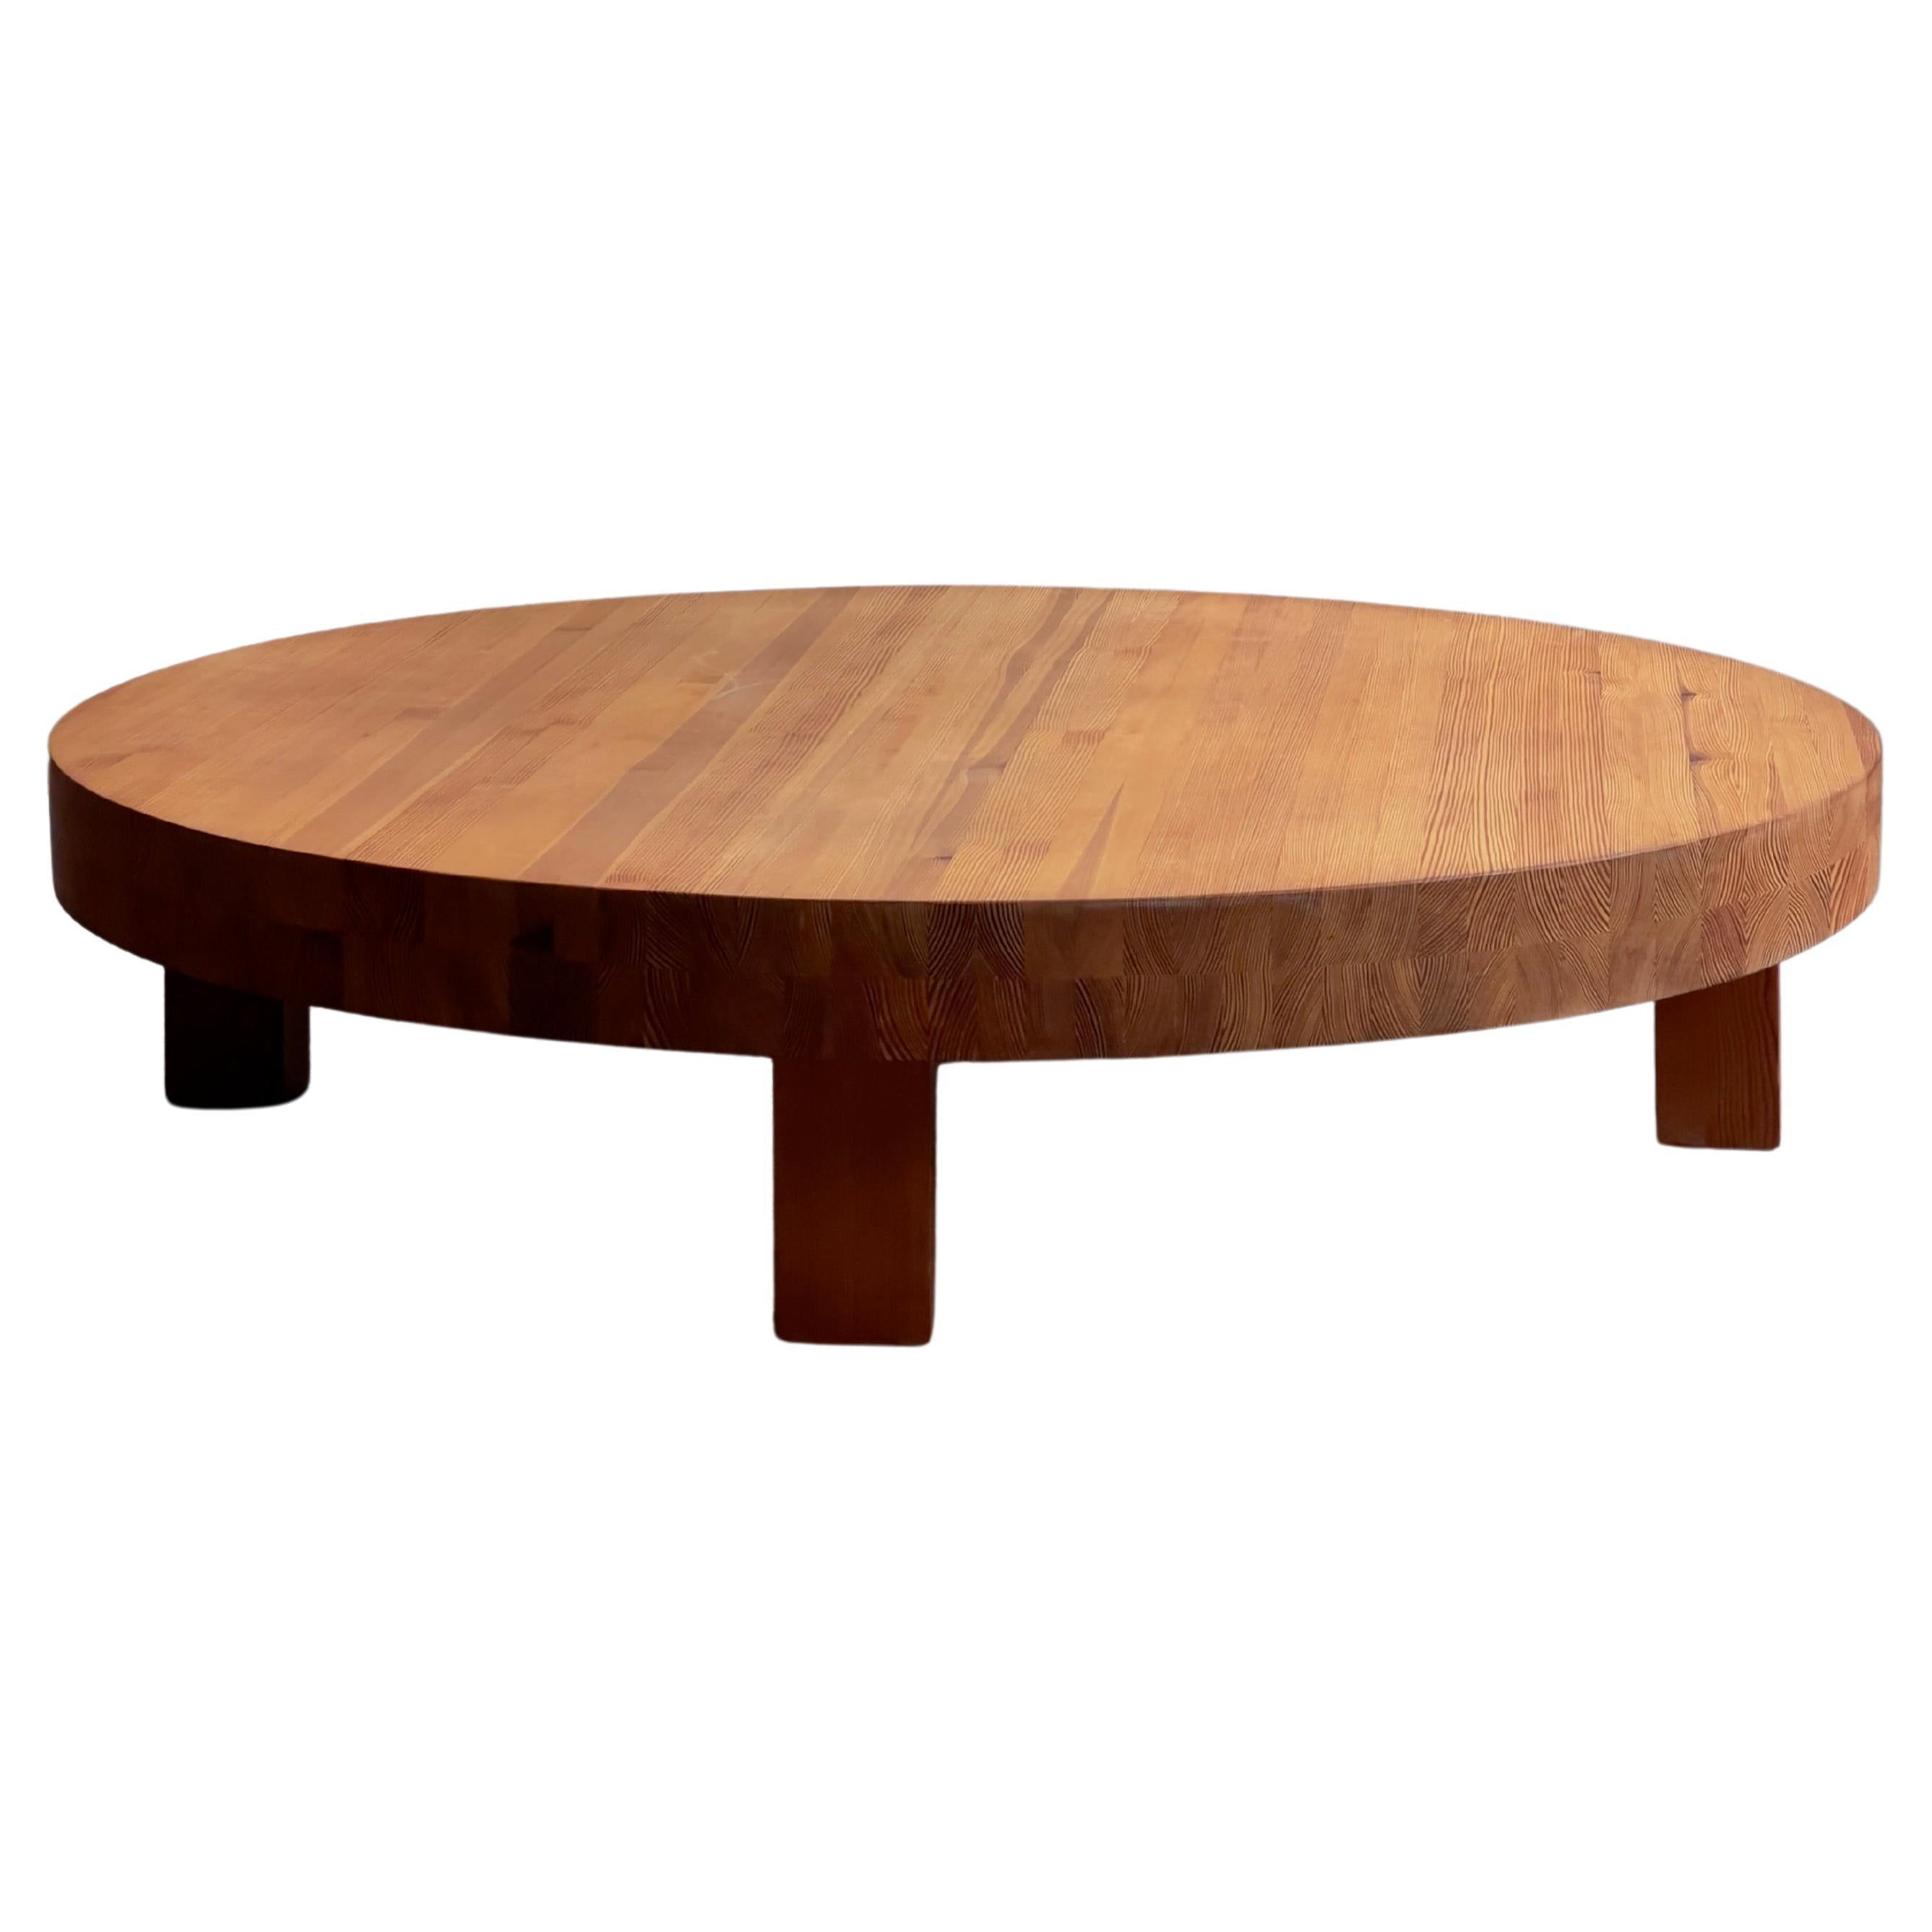 1970s round coffee table by danish cabinet maker in solid patinated pine wood. For Sale